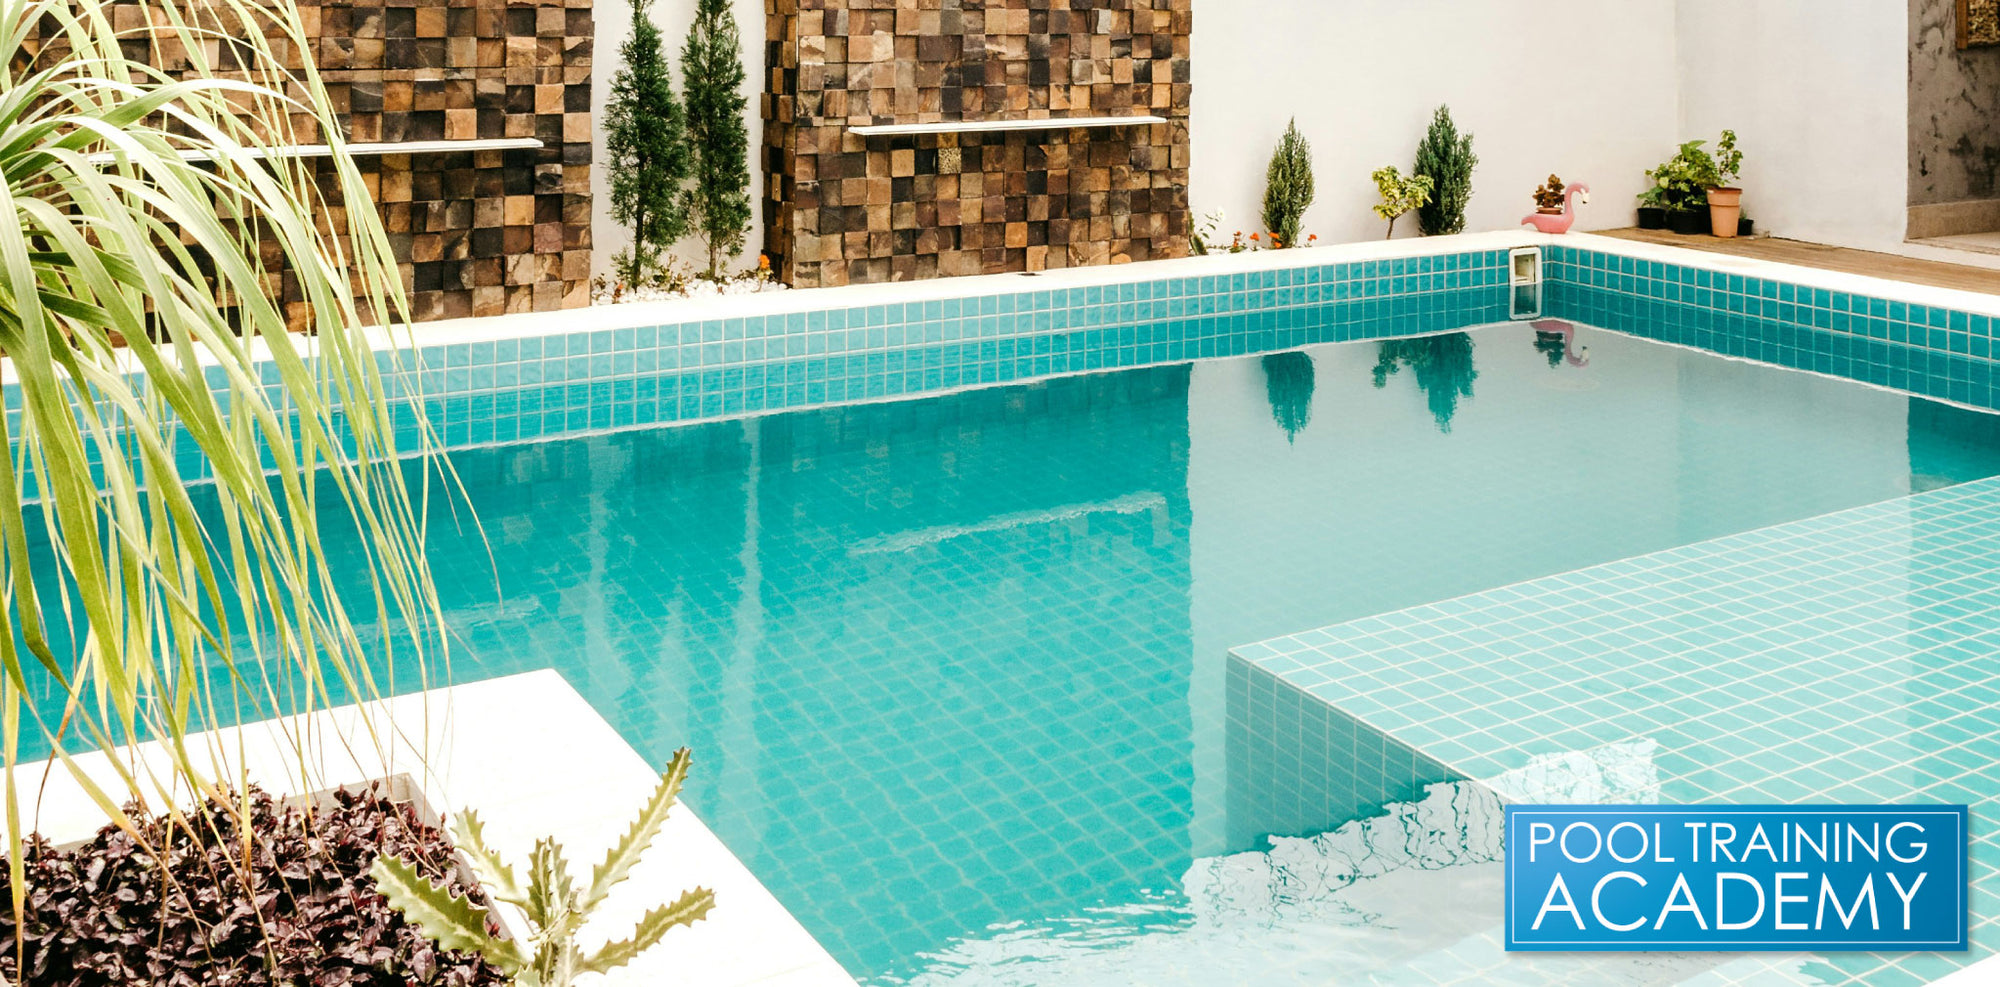 Which Swimming Pool Certification Is The Best?